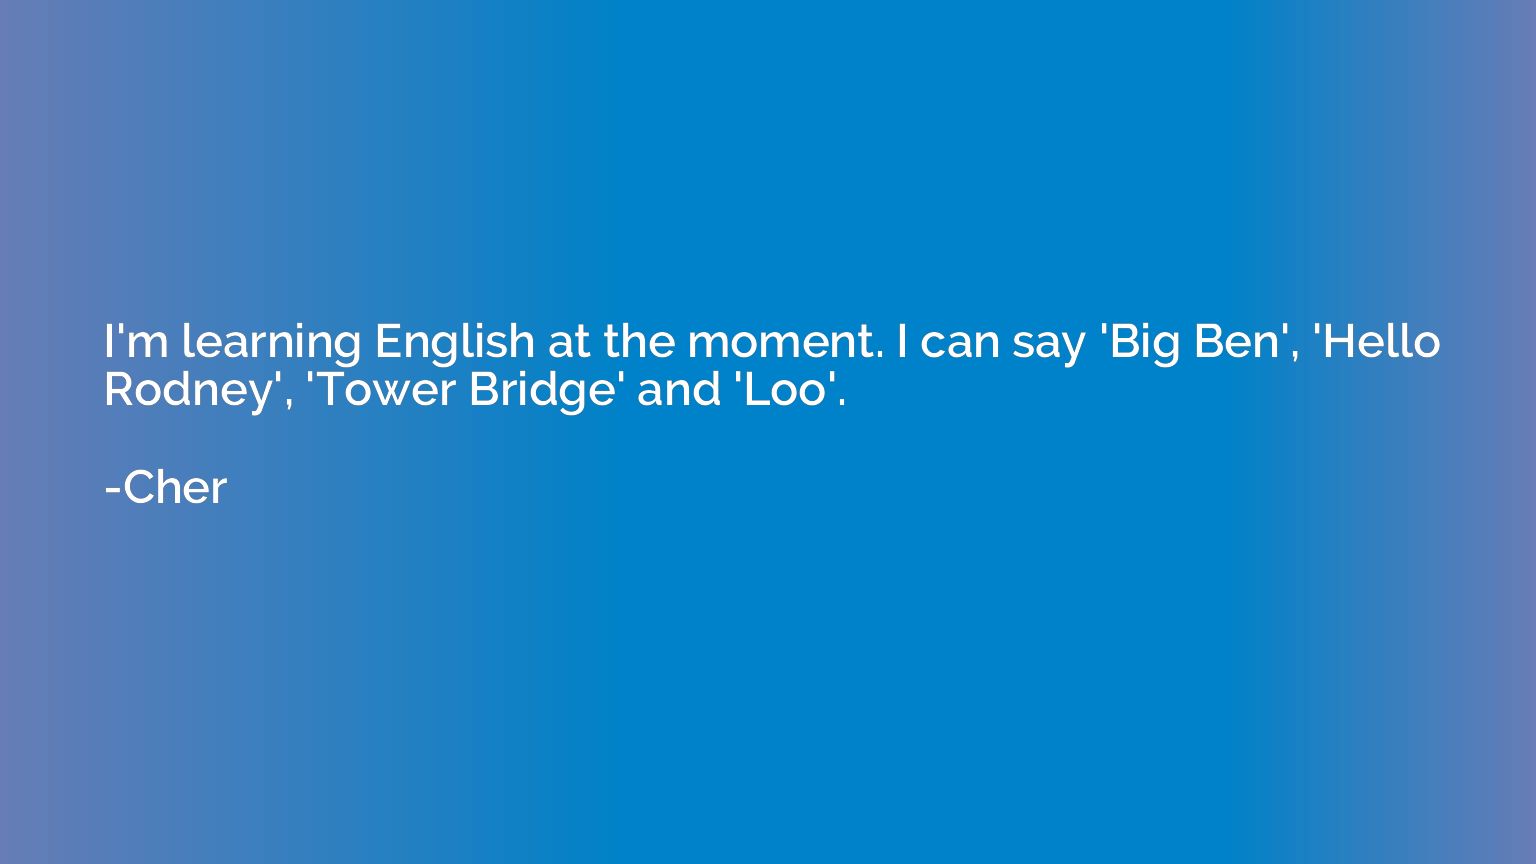 I'm learning English at the moment. I can say 'Big Ben', 'He